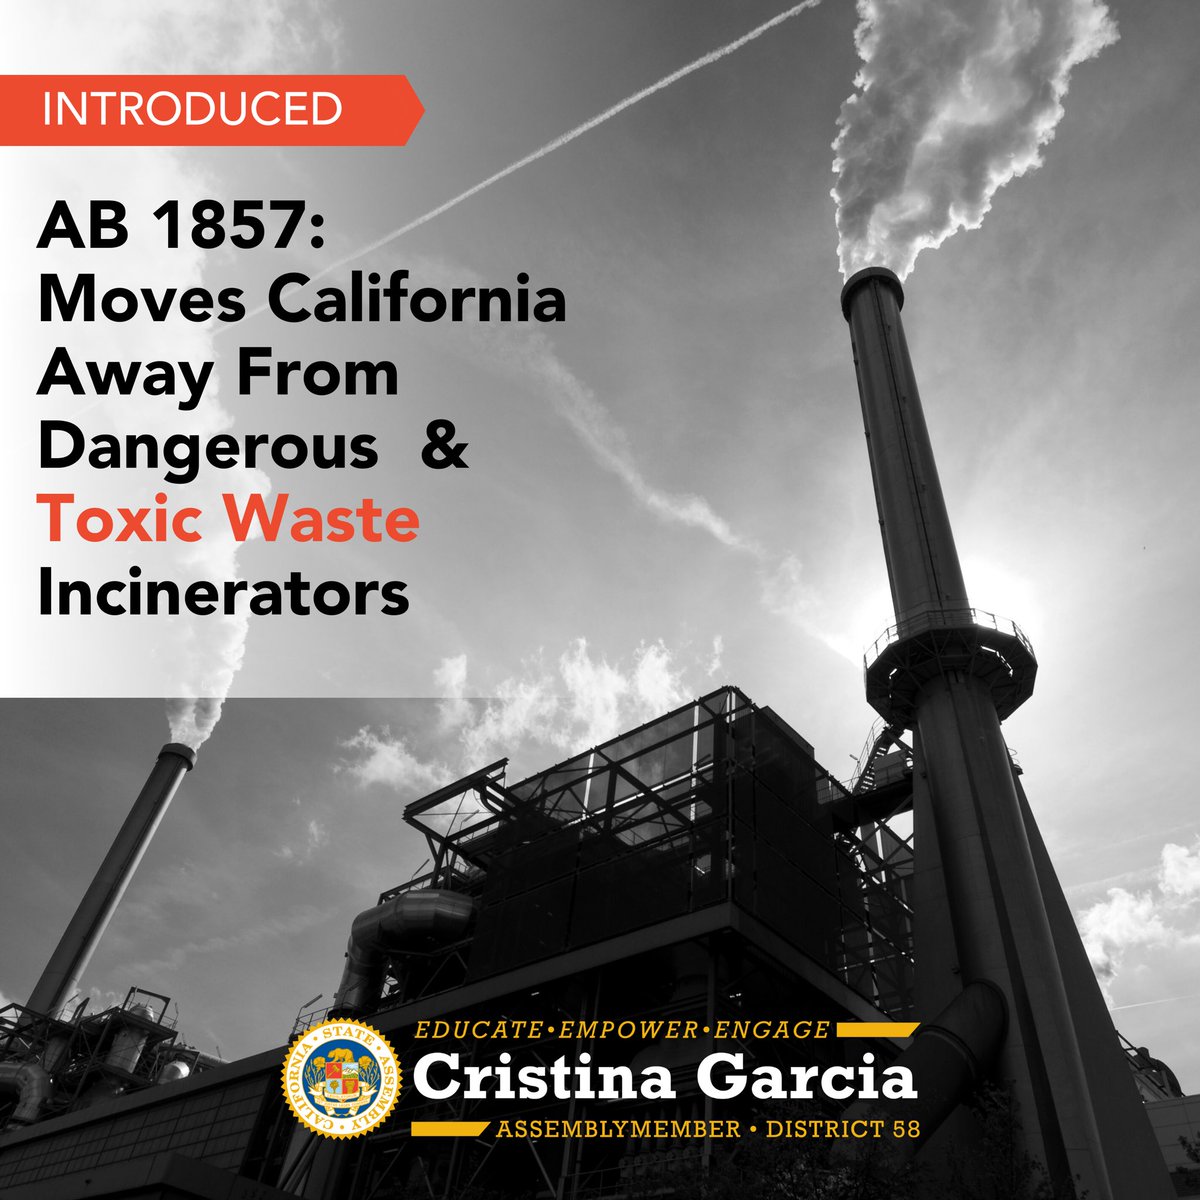 I introduced #AB1857 today to move CA closer to a #ZeroWaste future by eliminating the credit that incentivizes sending waste to toxic incinerators in #EnvironmentalJustice communities. #StopBurningTrashCA 

Read press release: bit.ly/3Jh42hl